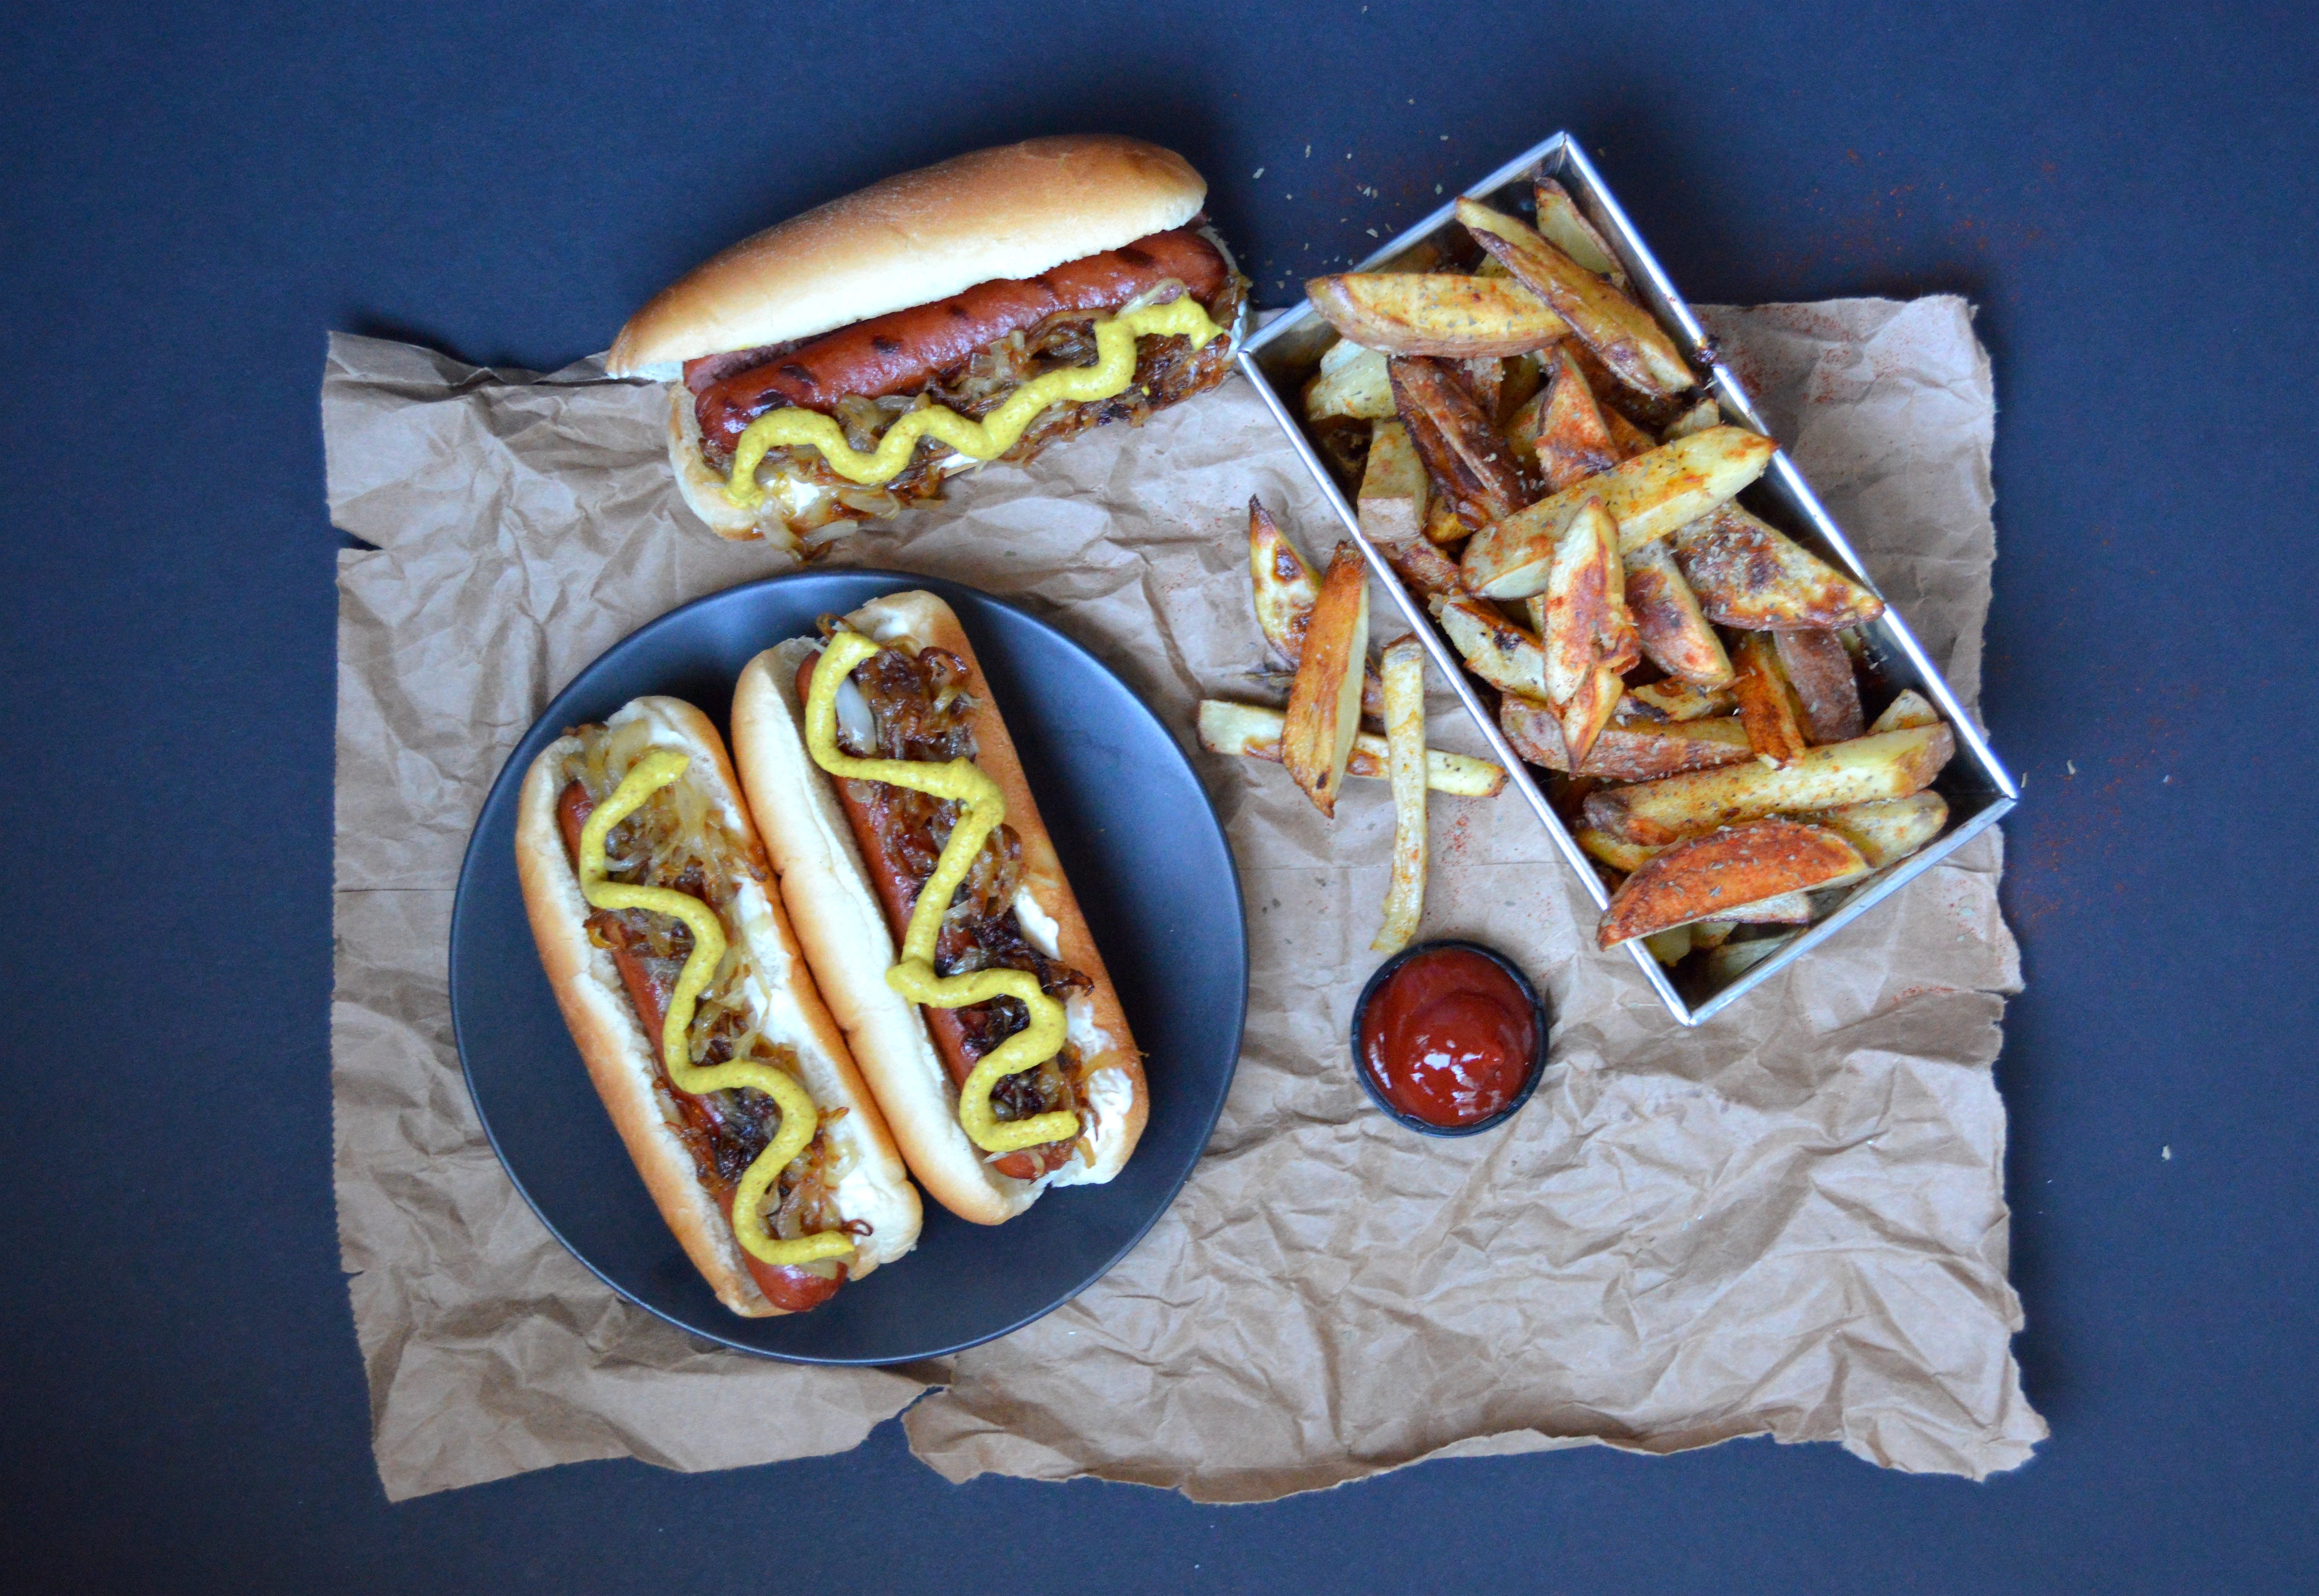 How to make the Seattle dog and baked red potato french fries | summer dinner recipe.